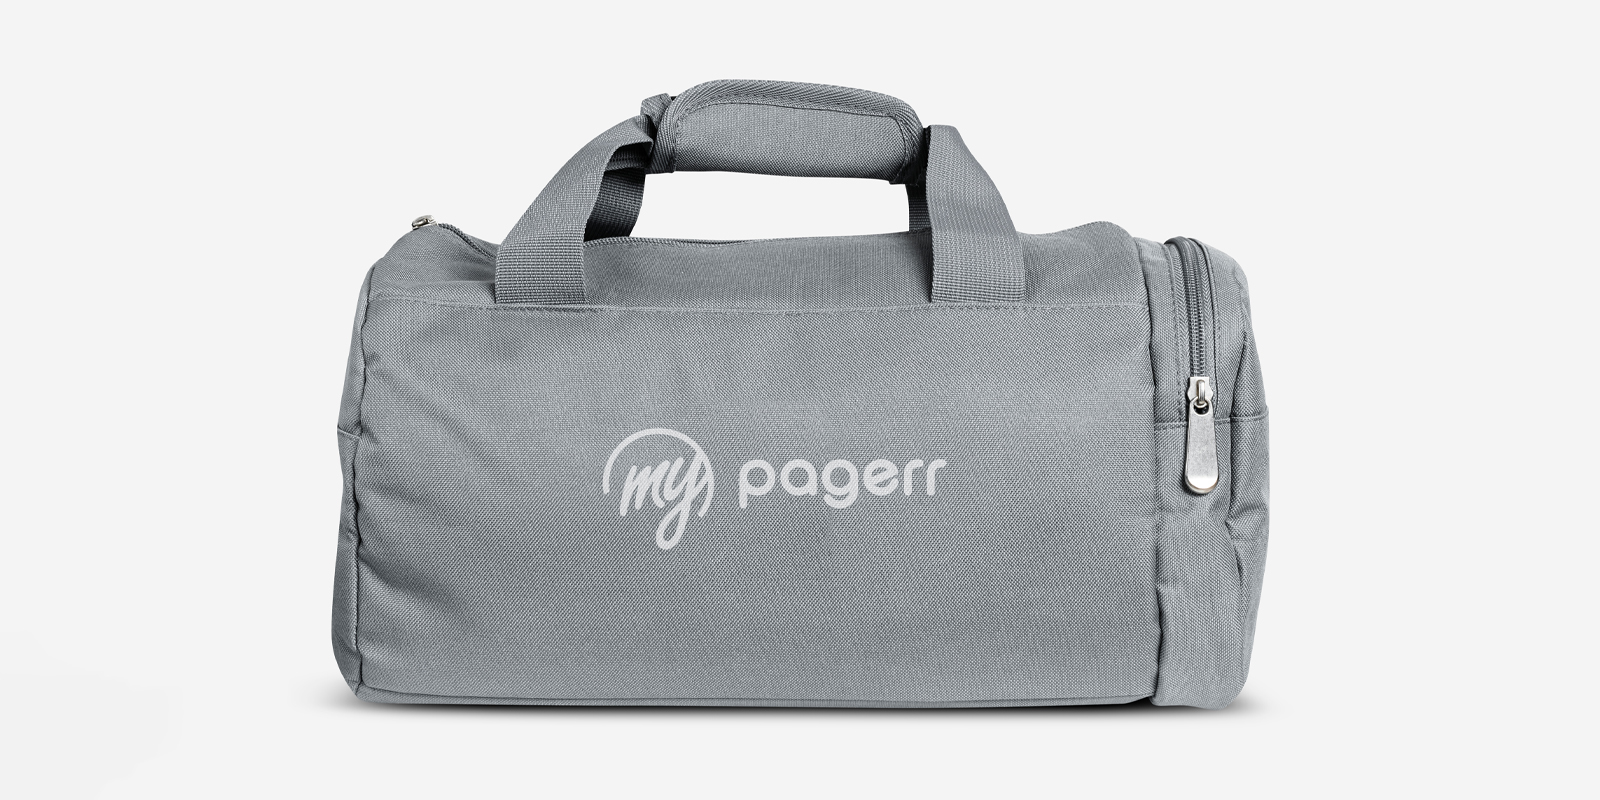 Duffel & gym bags in Madrid - Print with Pagerr